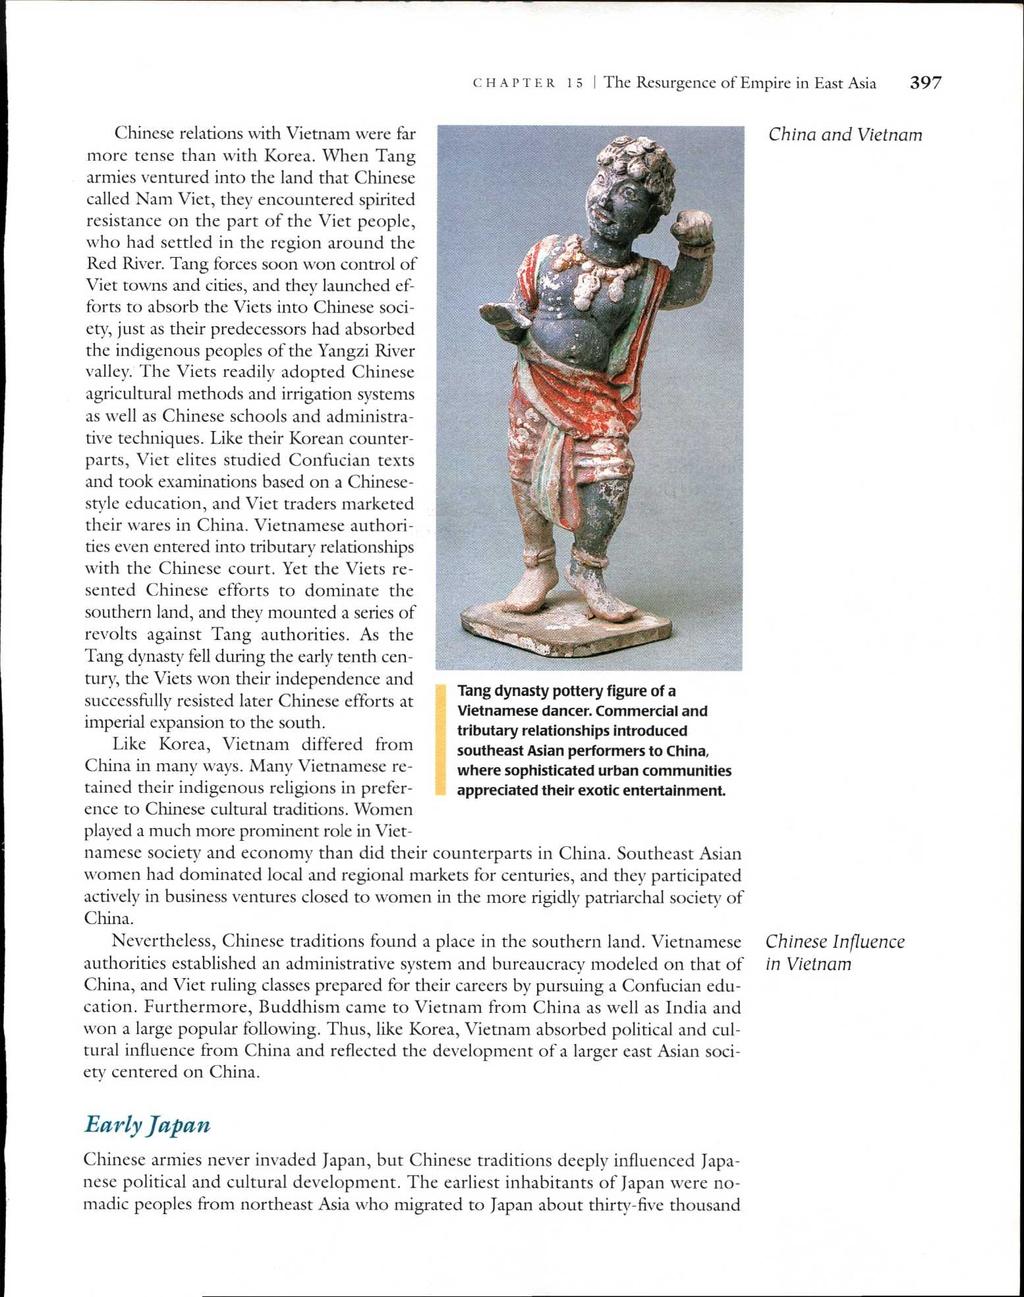 CHAPTER 15 I The Resurgence of Empire in East Asia 397 Tang dynasty pottery figure of a Vietnamese dancer.